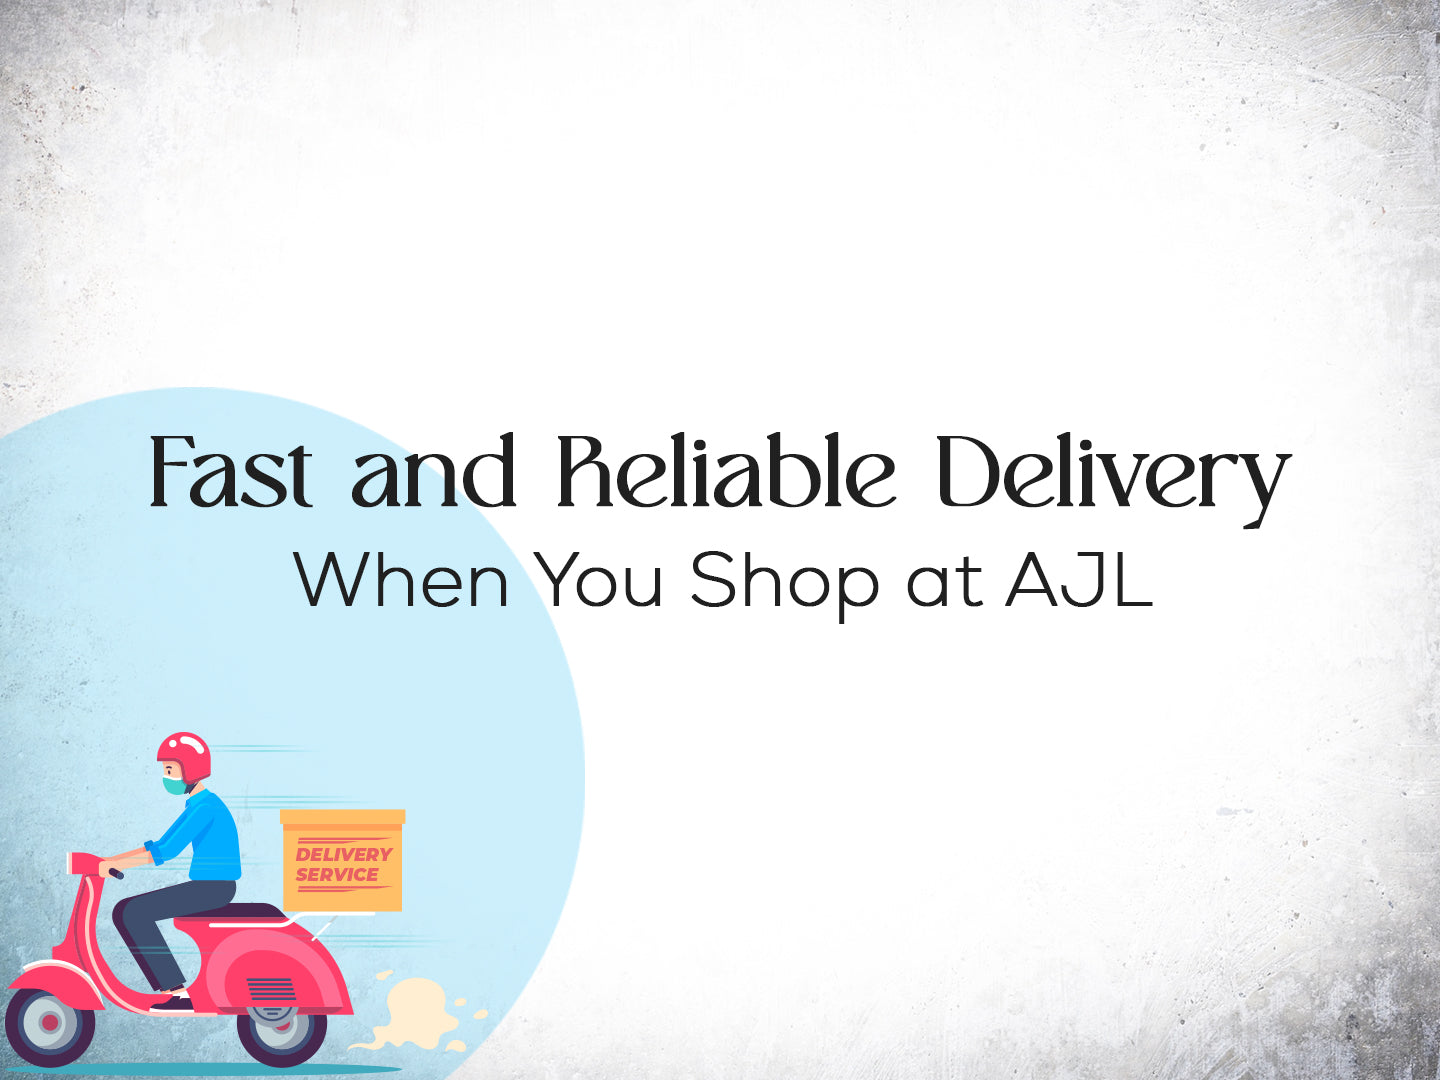 Fast and Reliable Delivery when you shop at AJL